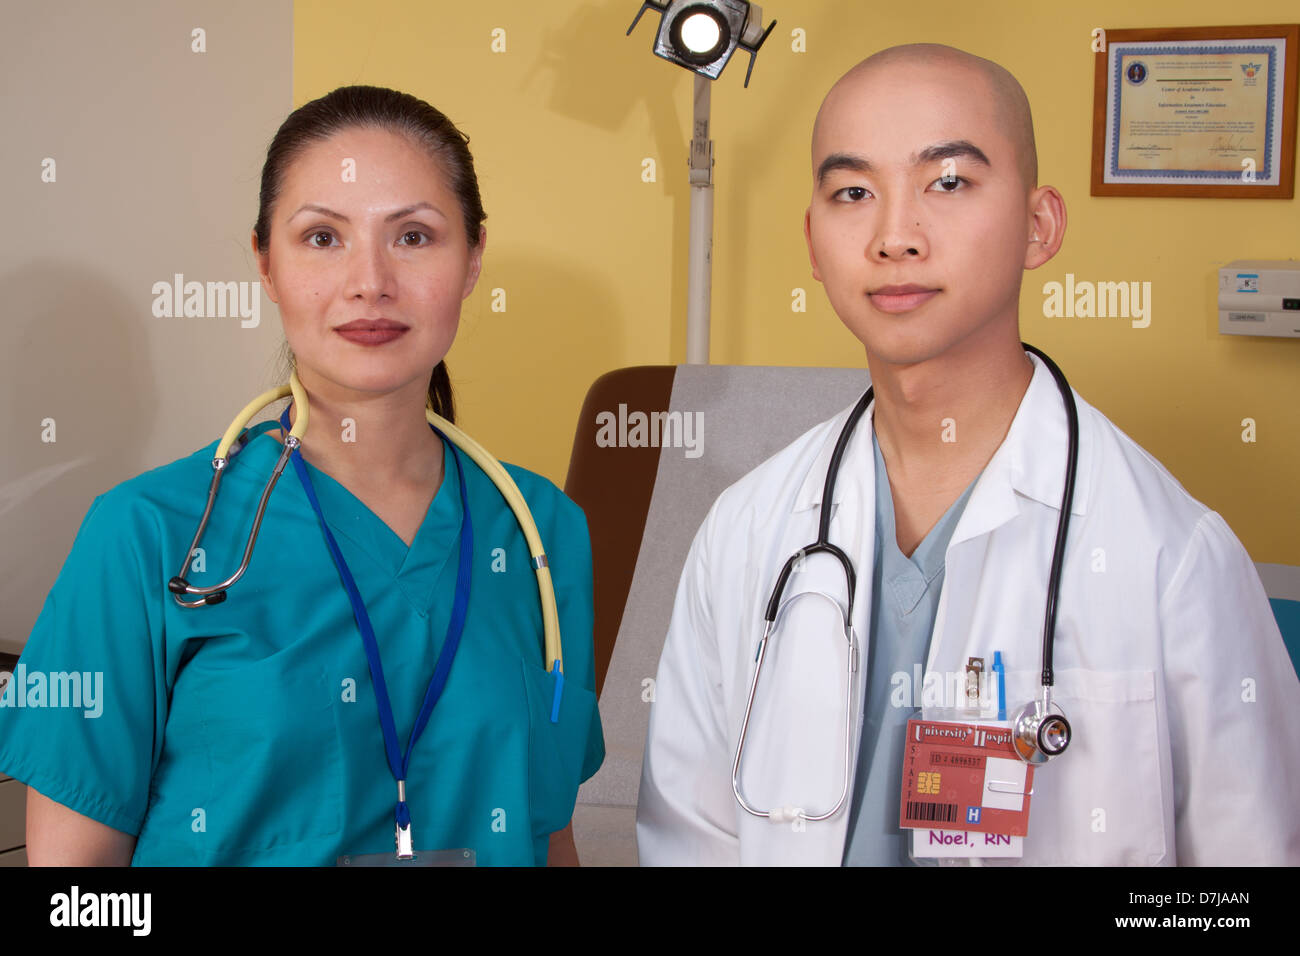 Portrait of two health care professionals, in exam room. Stock Photo